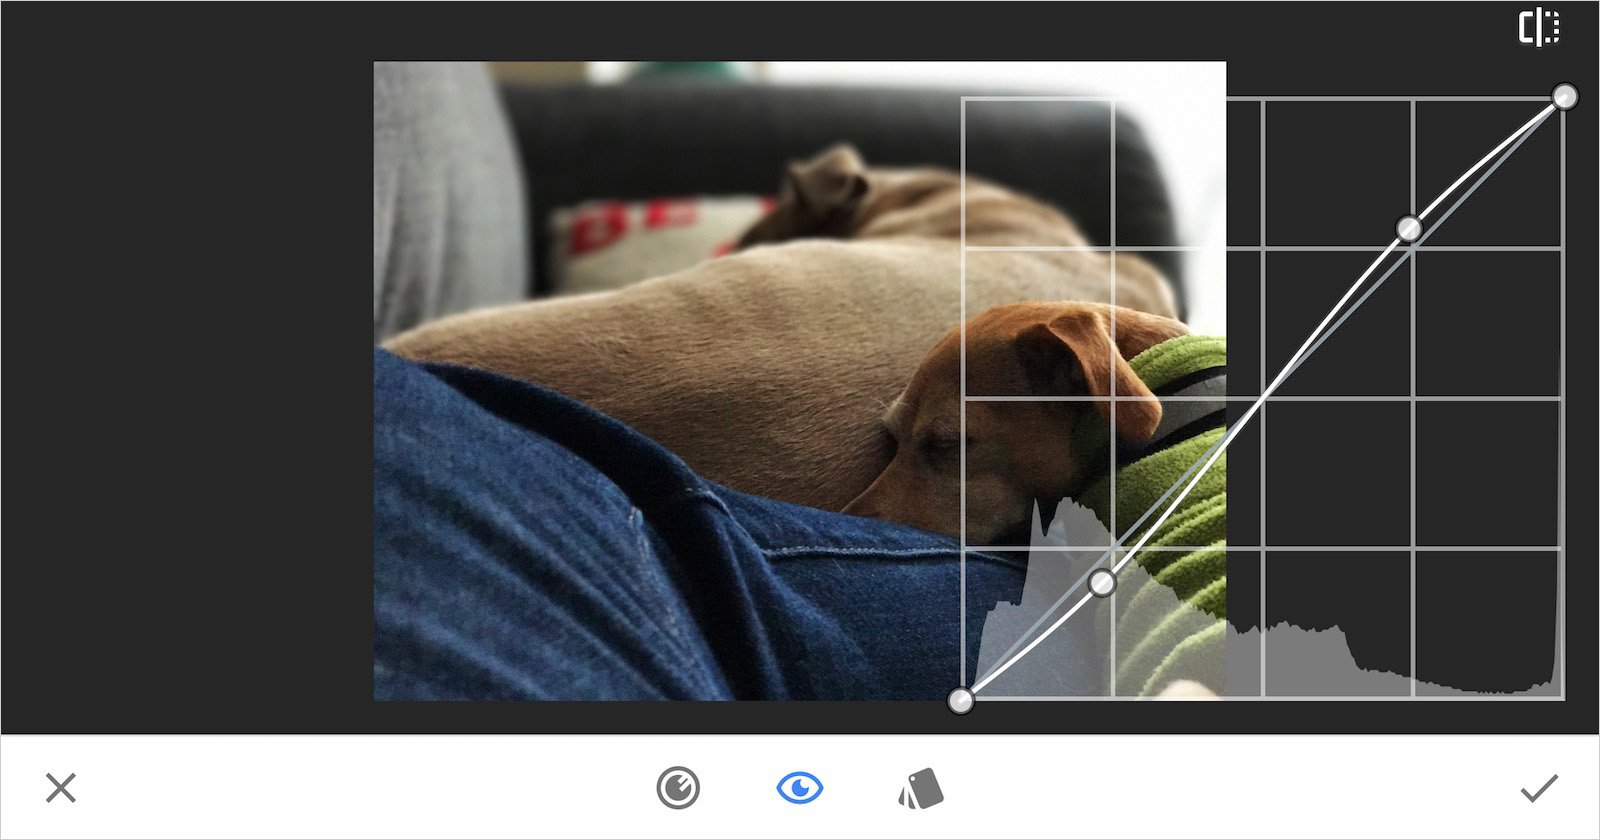  snapseed update adds curves try harder face 